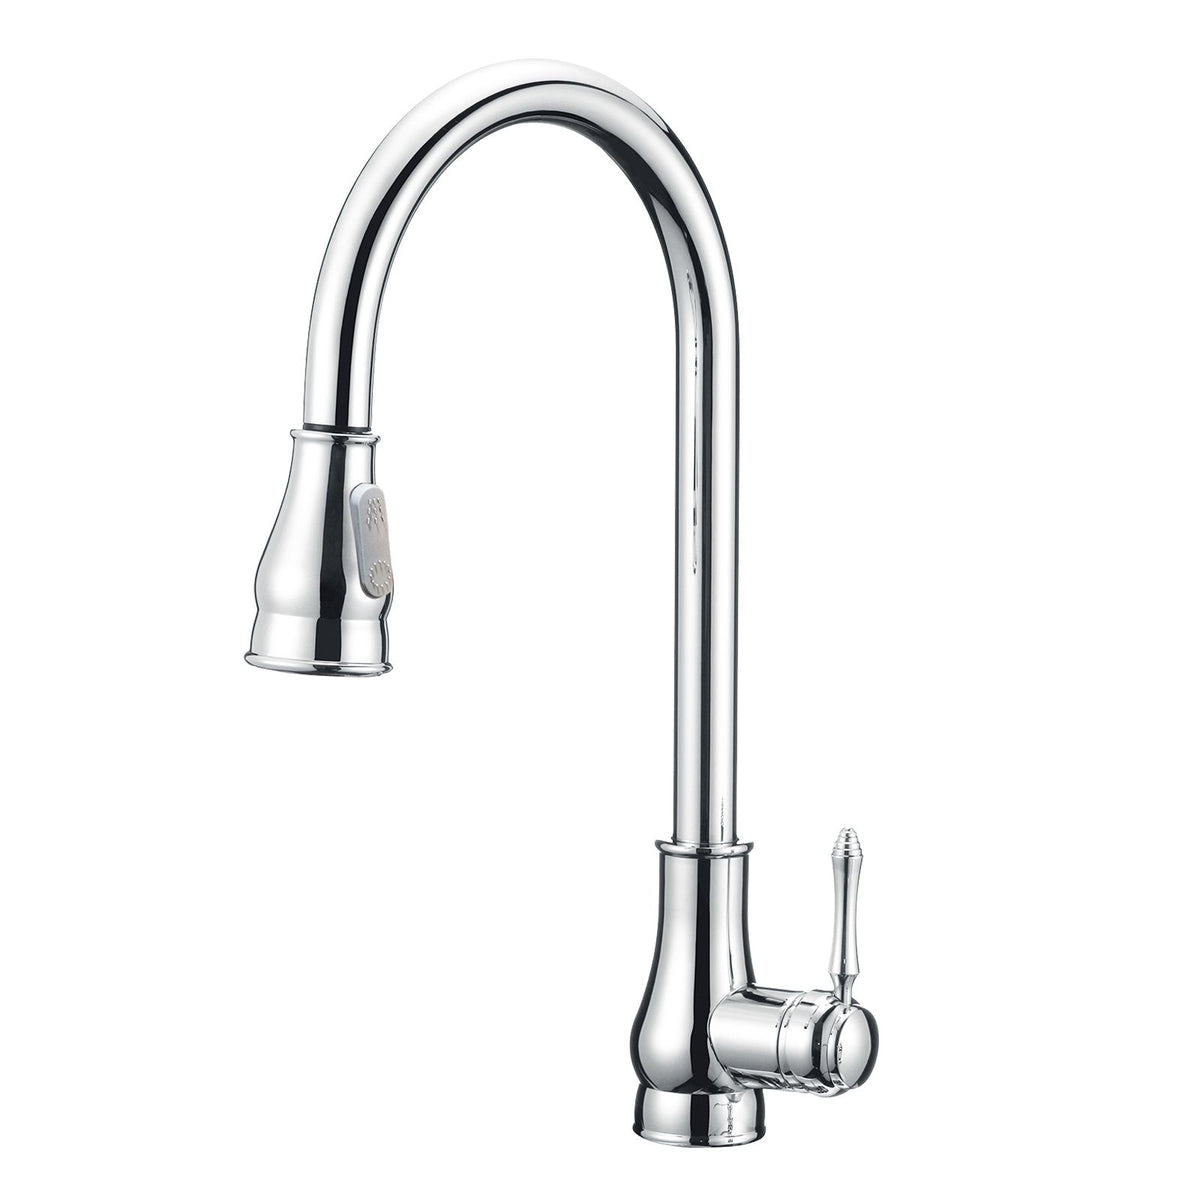 .Round Chrome Vintage Pull Out Kitchen Sink Mixer Tap CH1018.KM